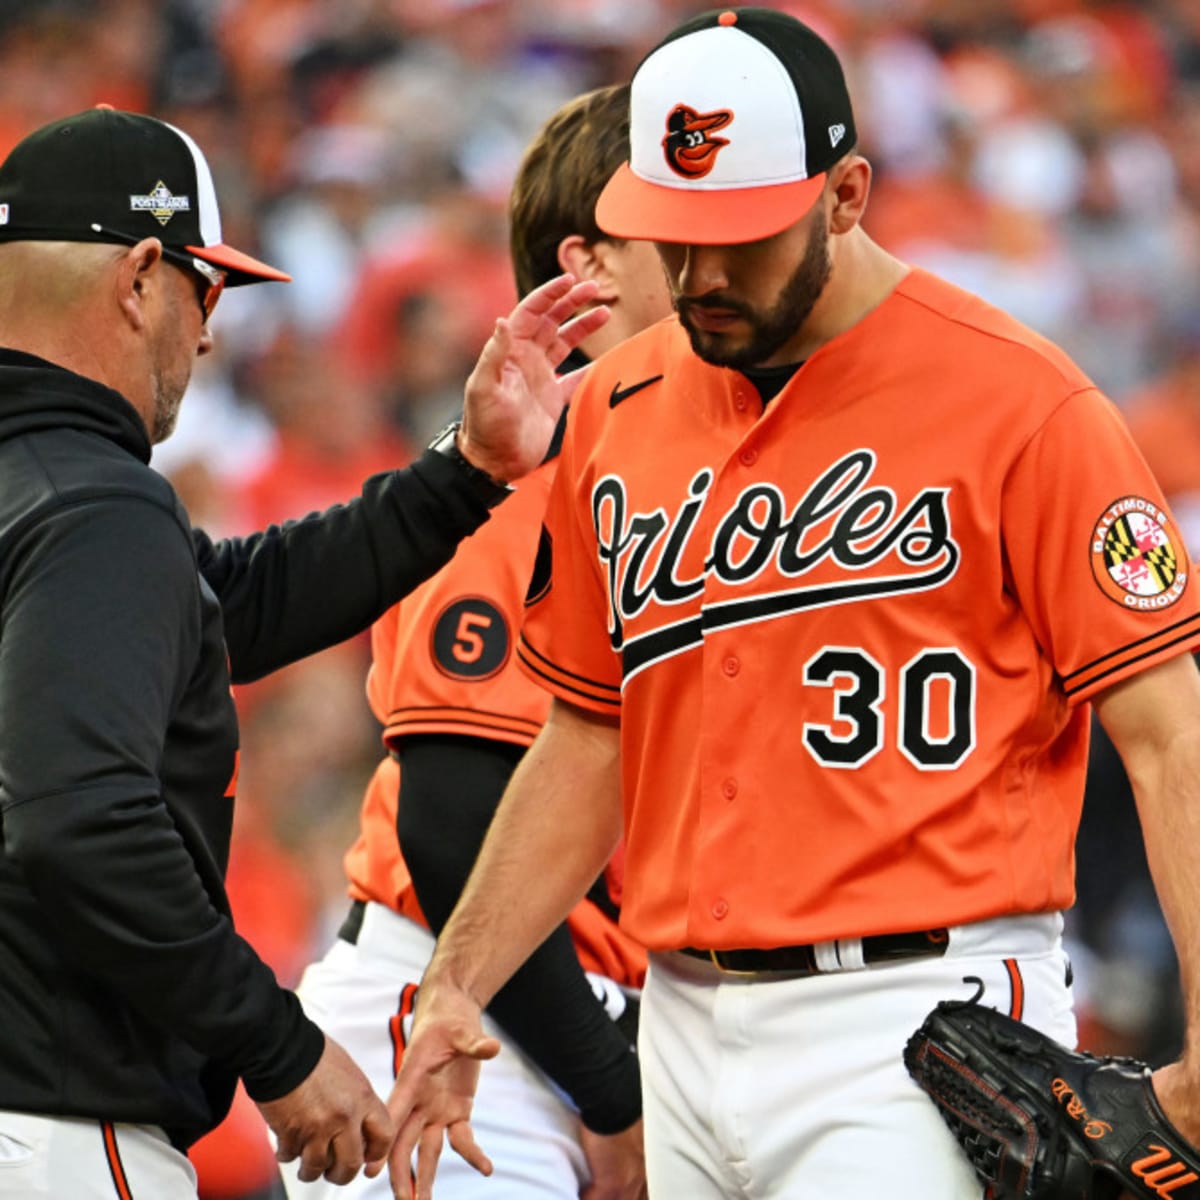 Grayson Rodriguez blasted by Rangers as Orioles lose 12-2 - Camden Chat